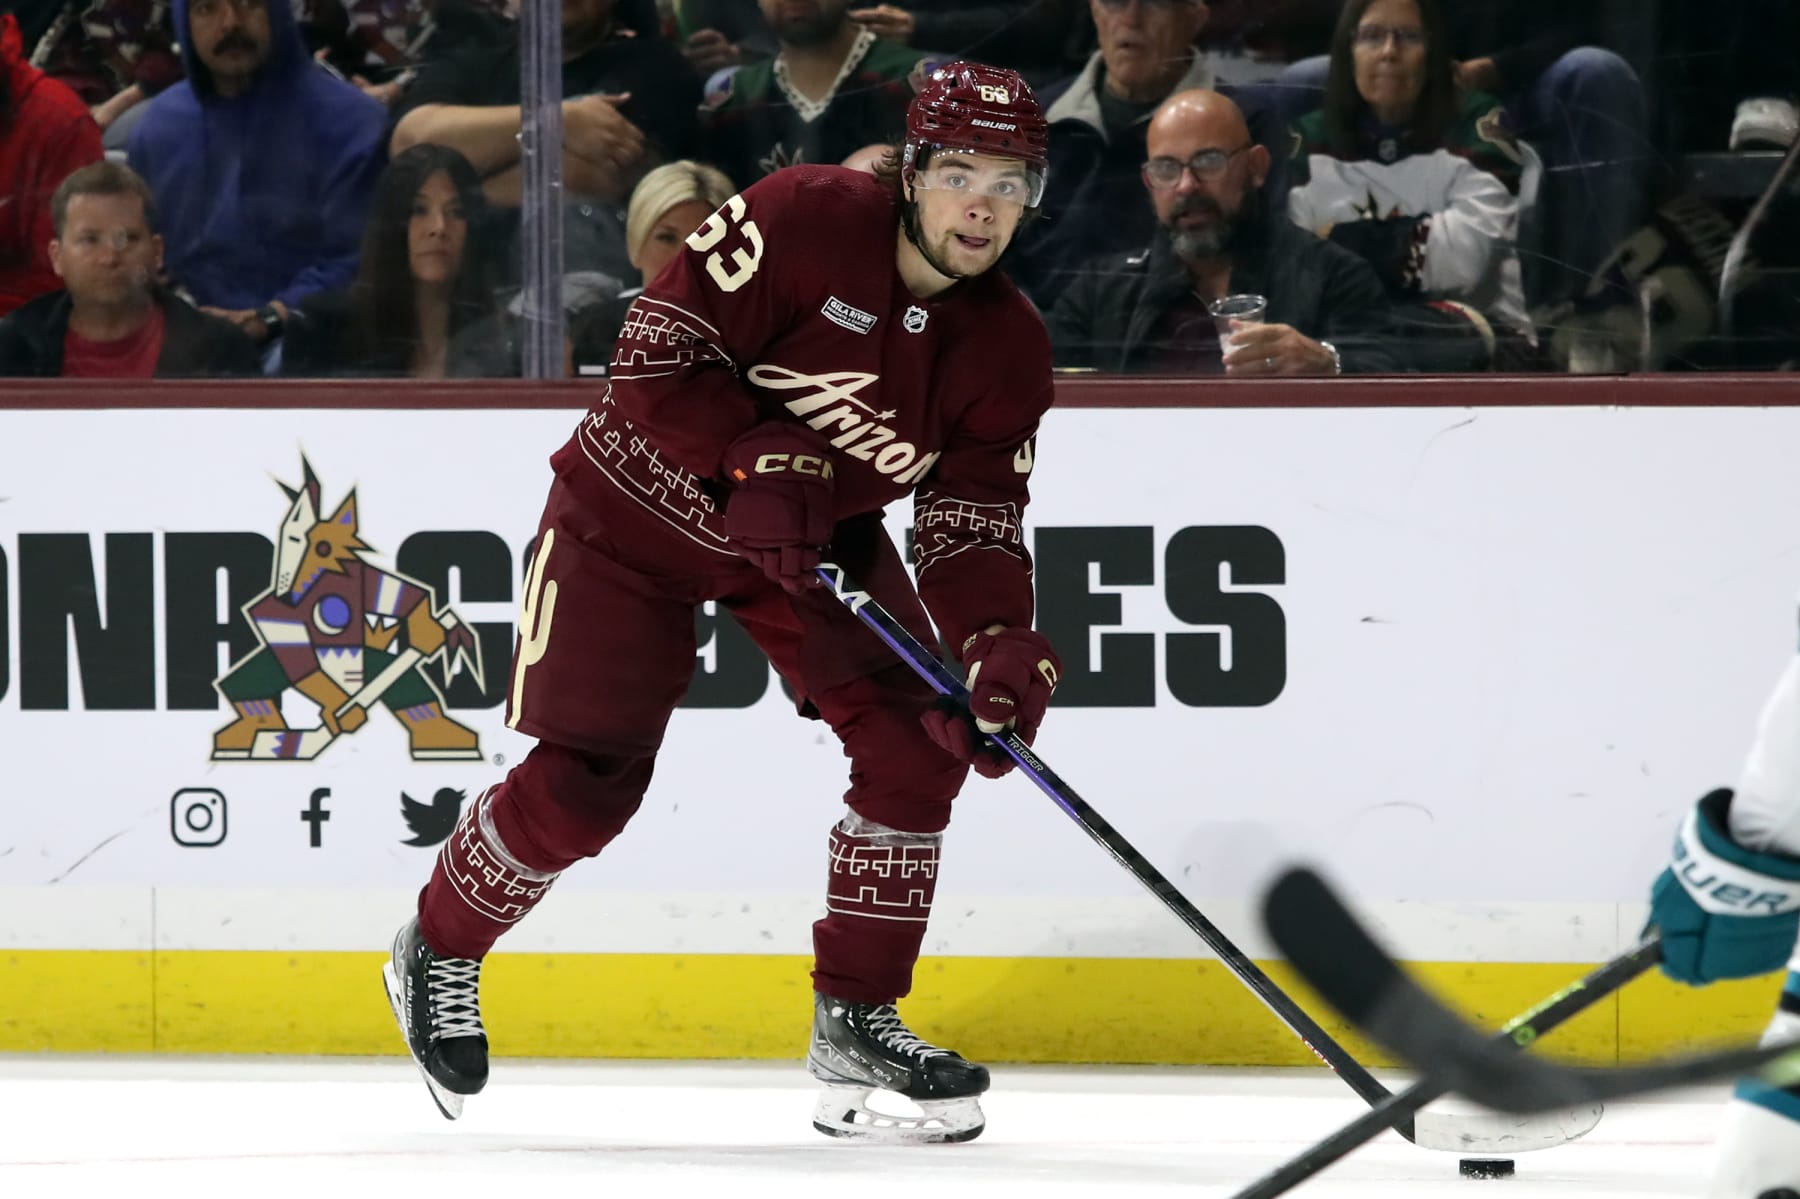 The advantages and disadvantages of Barrett Hayton playing with Coyotes